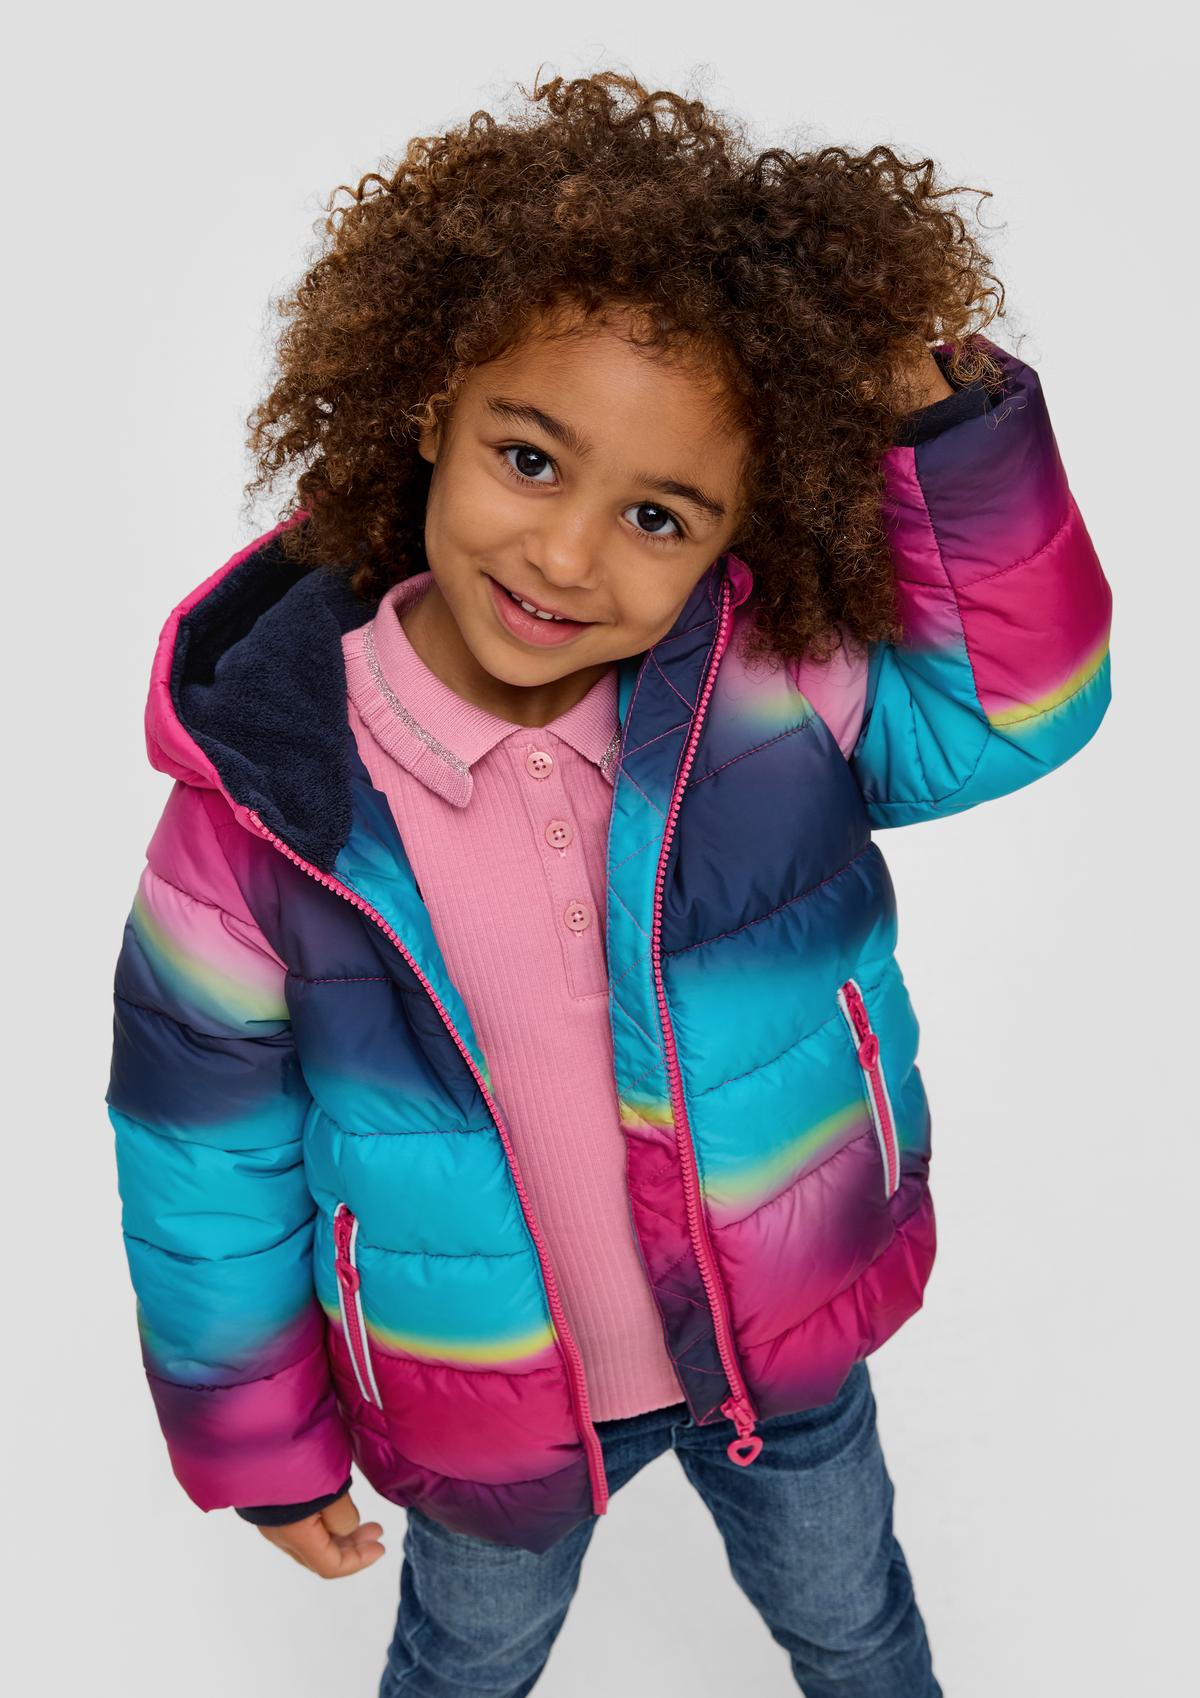 Discover jackets and body warmers for girls online